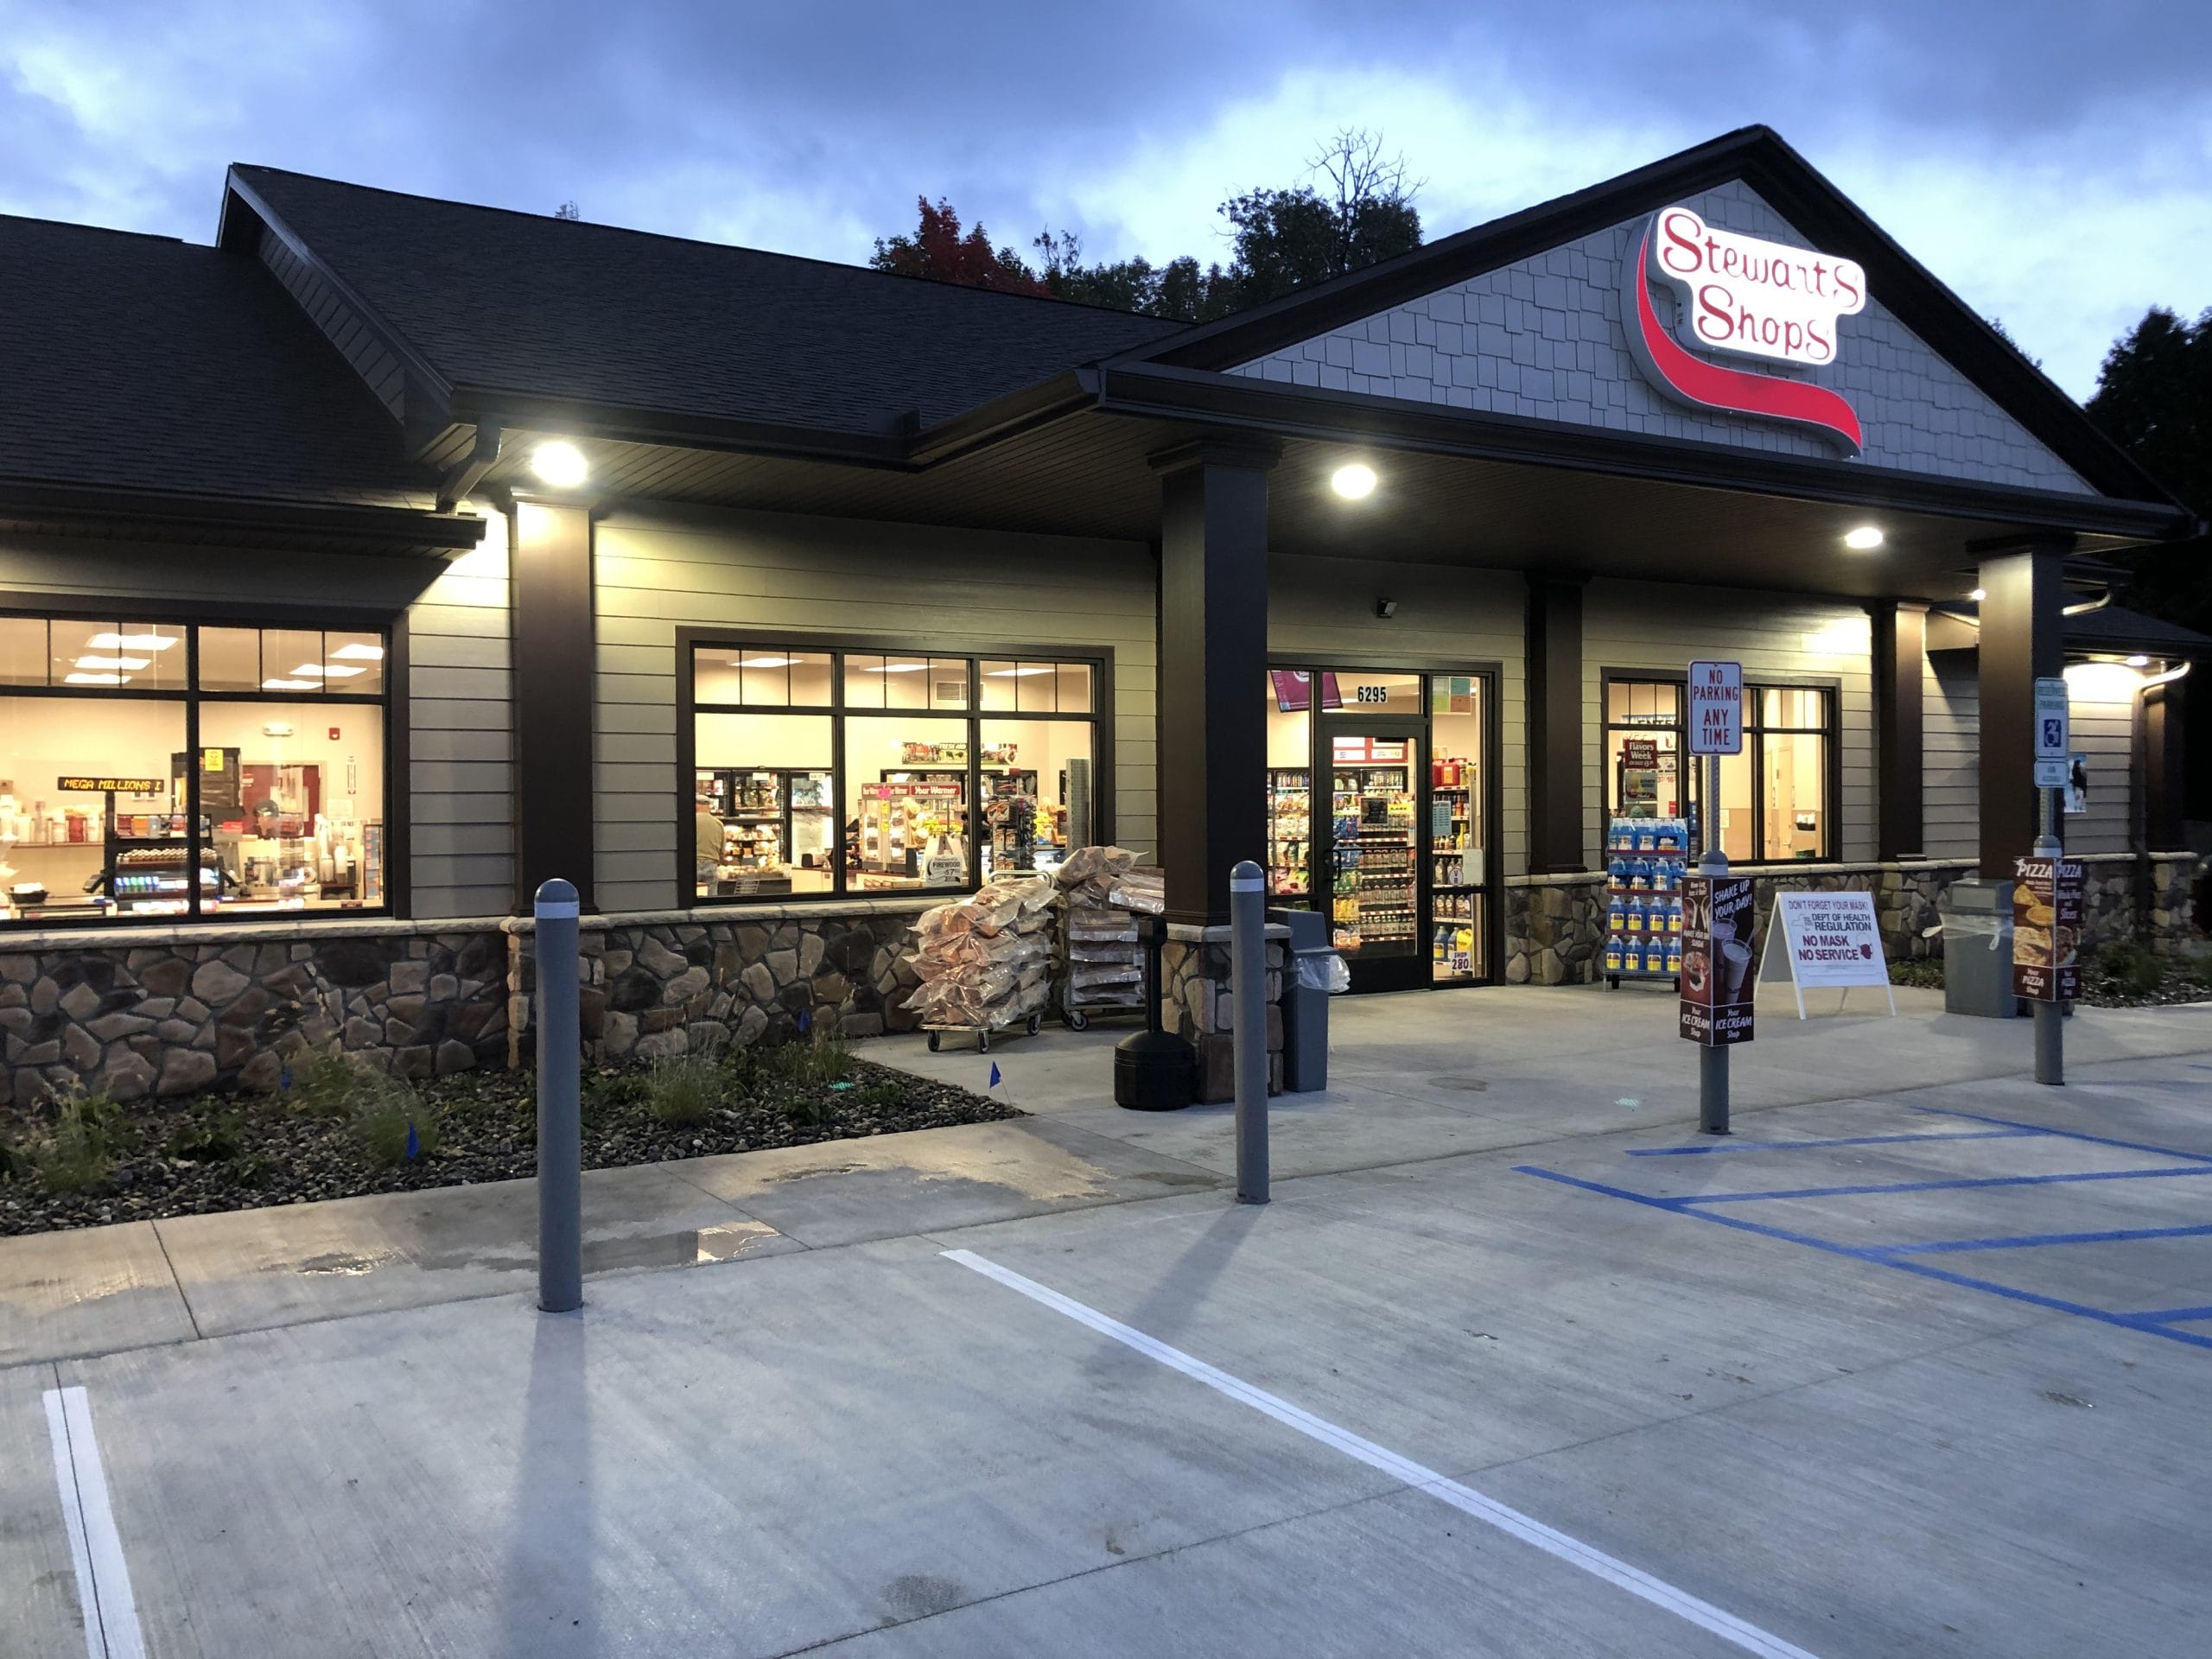 Exterior of new store at night